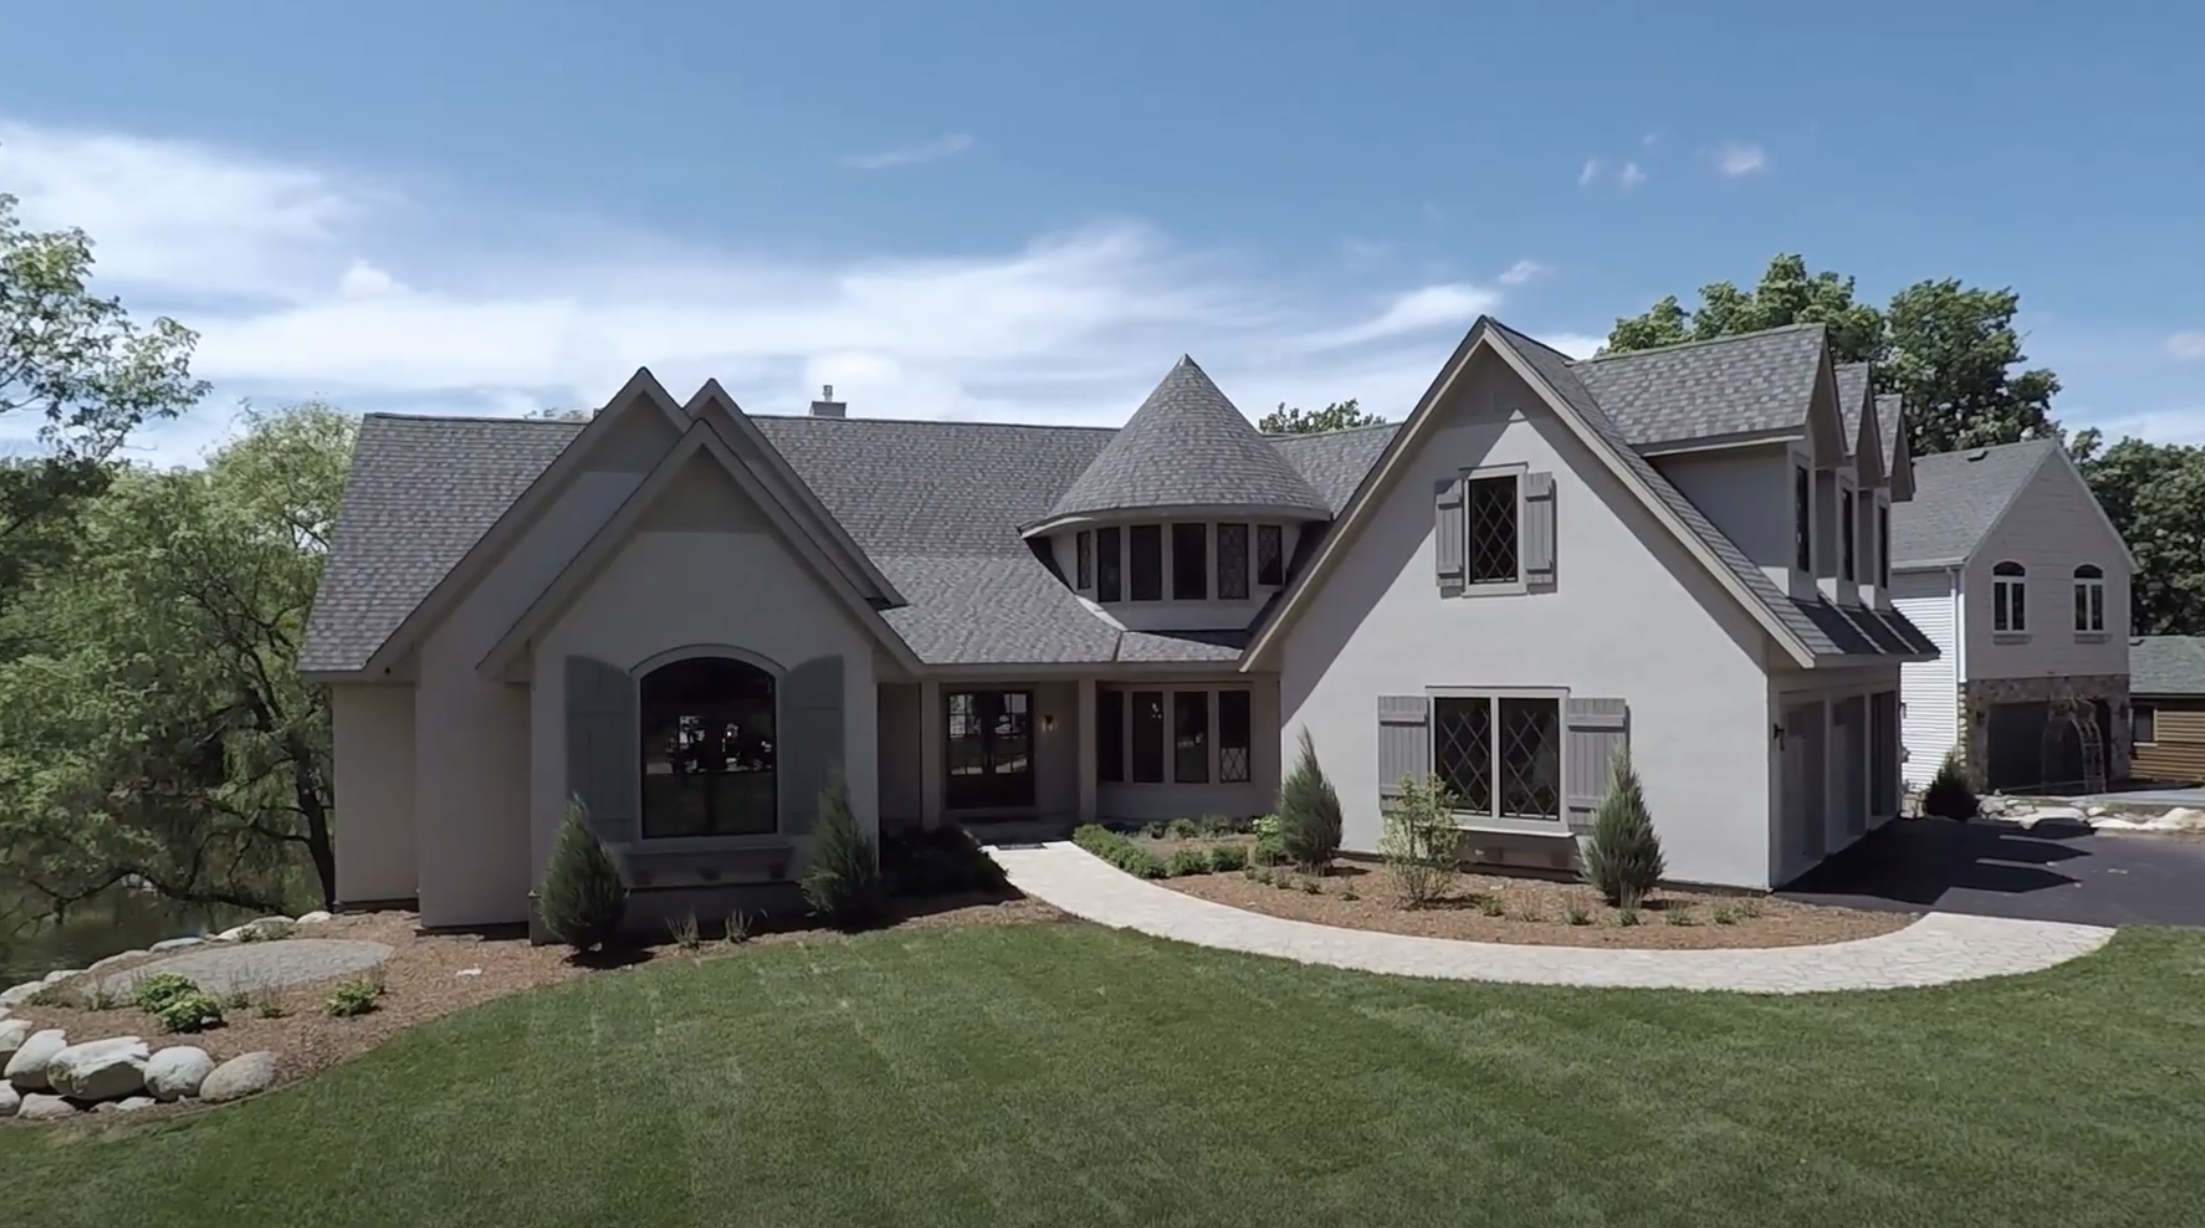 A custom home build video series showcasing a 3D rendering of a home with a large front yard.